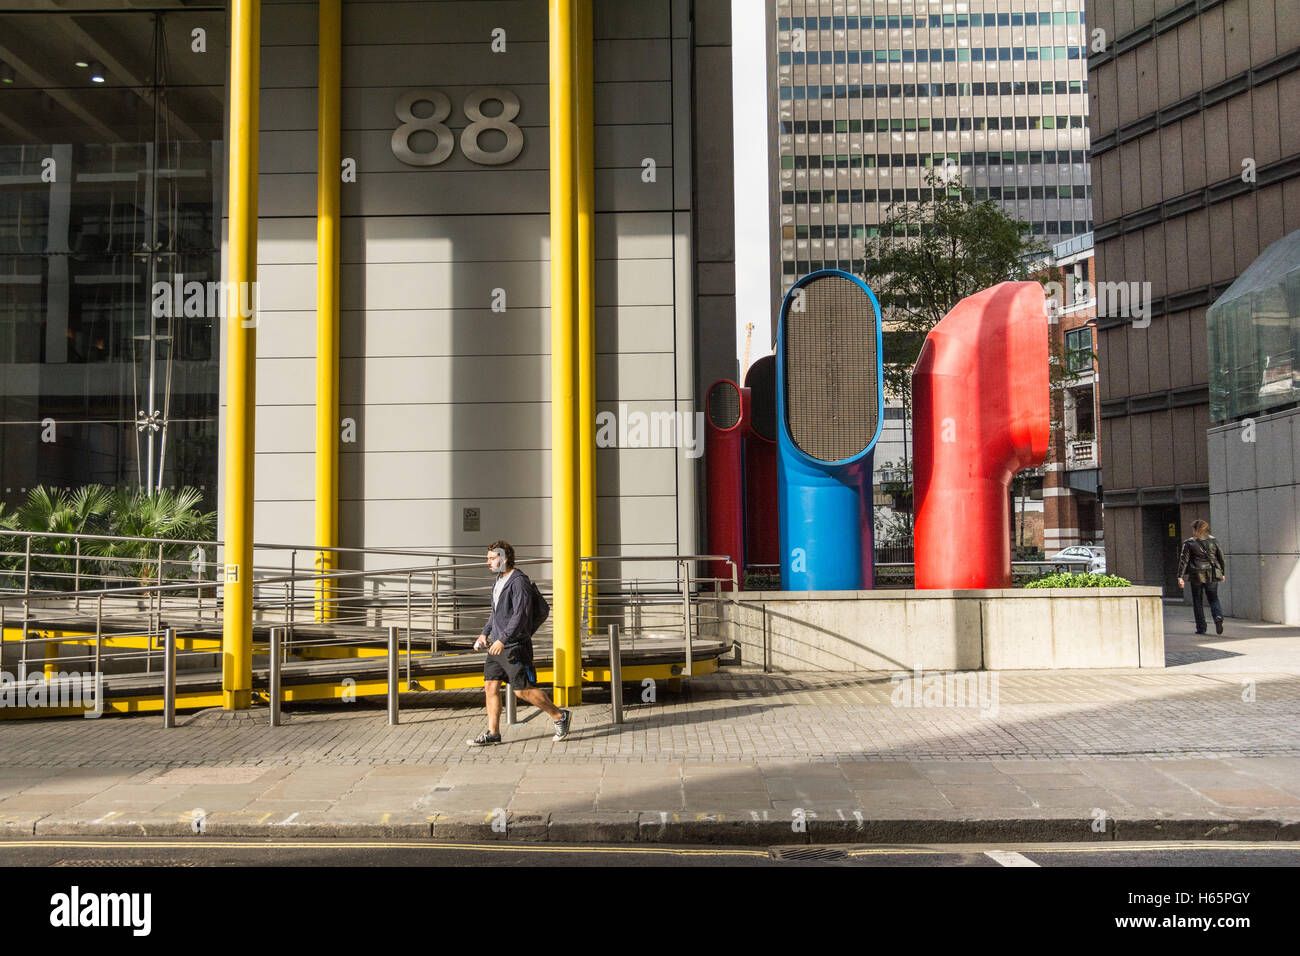 Brightly coloured ventilation shafts at 88 Wood Street, in the City of London, UK Stock Photo